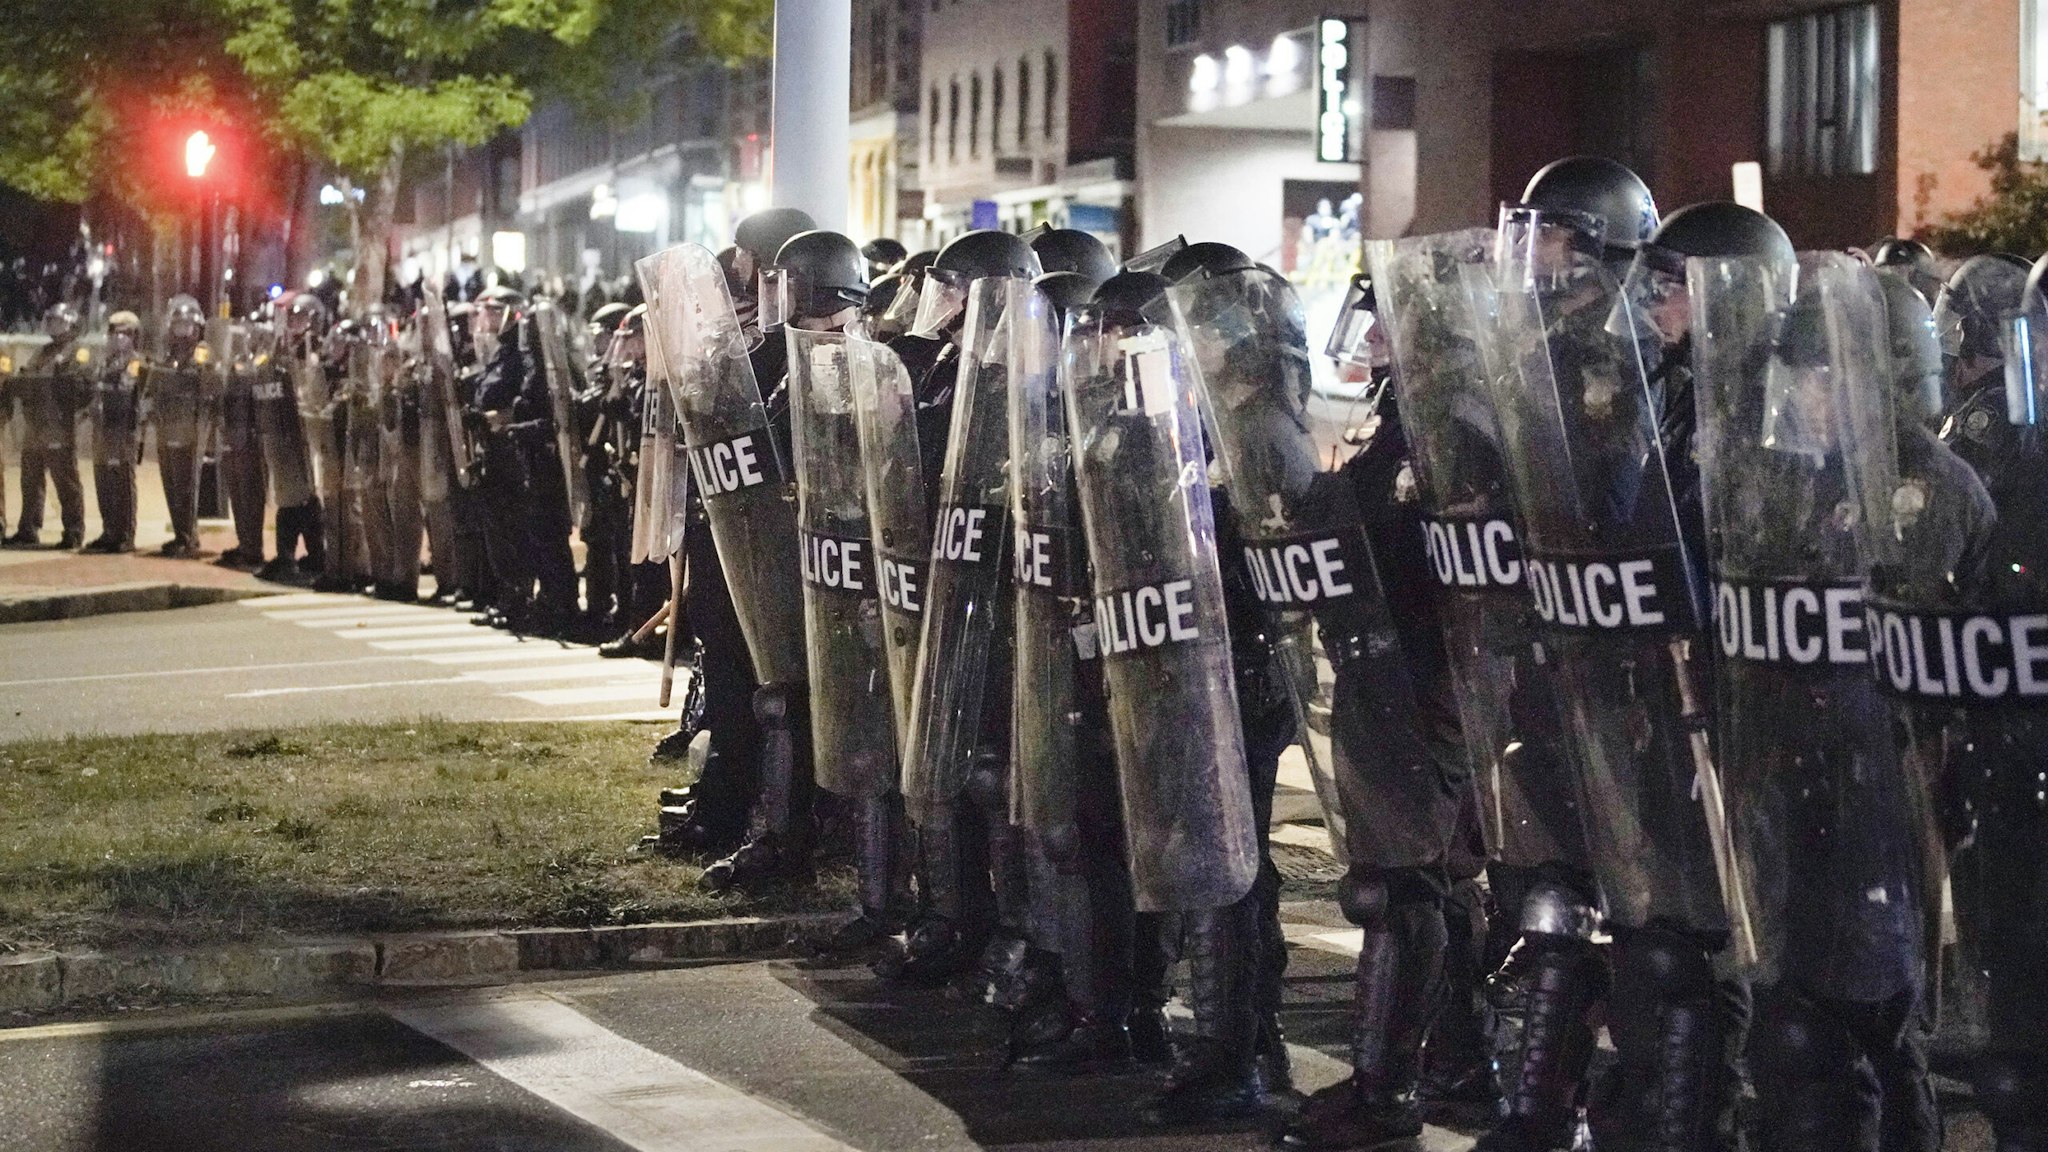 PORTLAND, ME - JUNE 2: Police in riot gear form a line across Franklin Arterial on Tuesday night. (Staff Photo by Gregory Rec/Portland Press Herald via Getty Images)